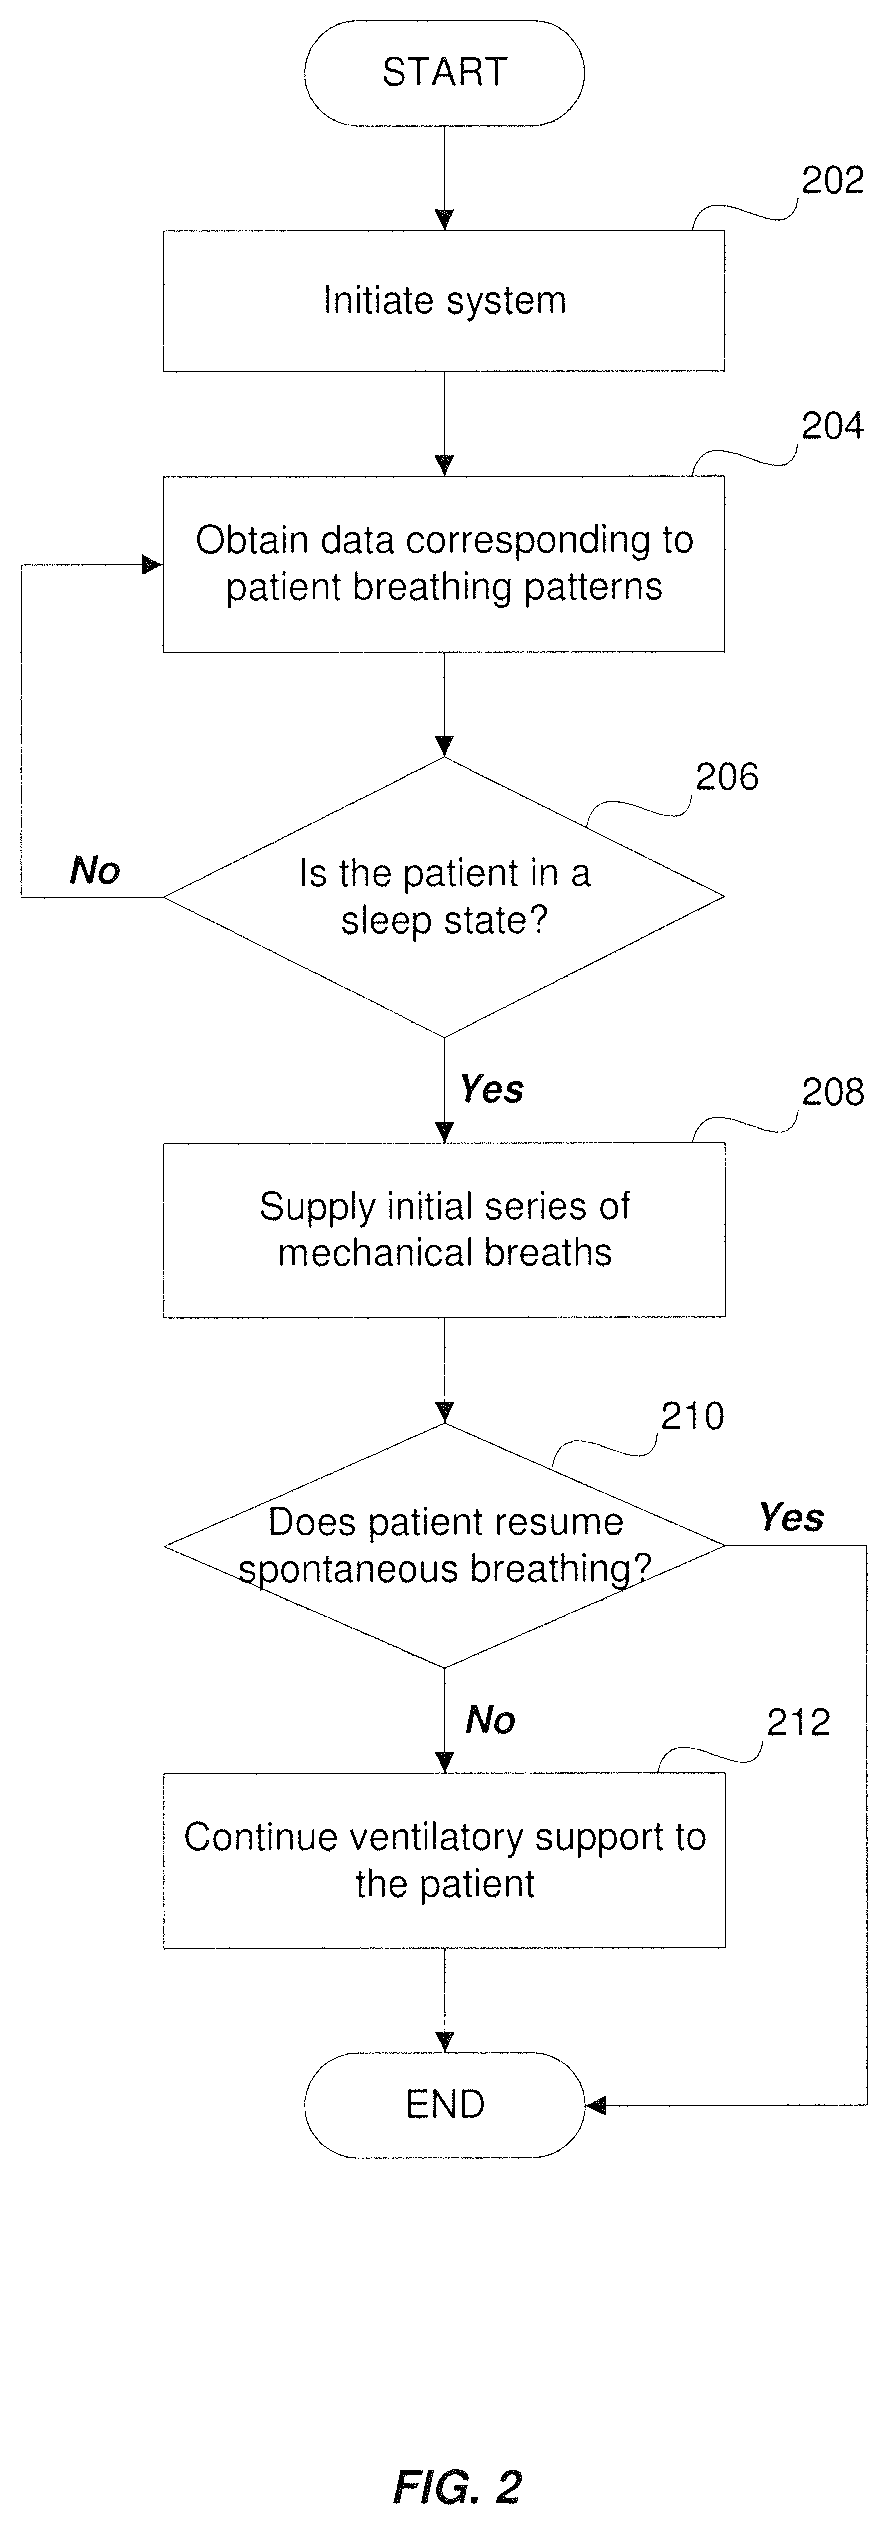 Method and system for diagnosis and treatment of sleep disordered breathing of a patient